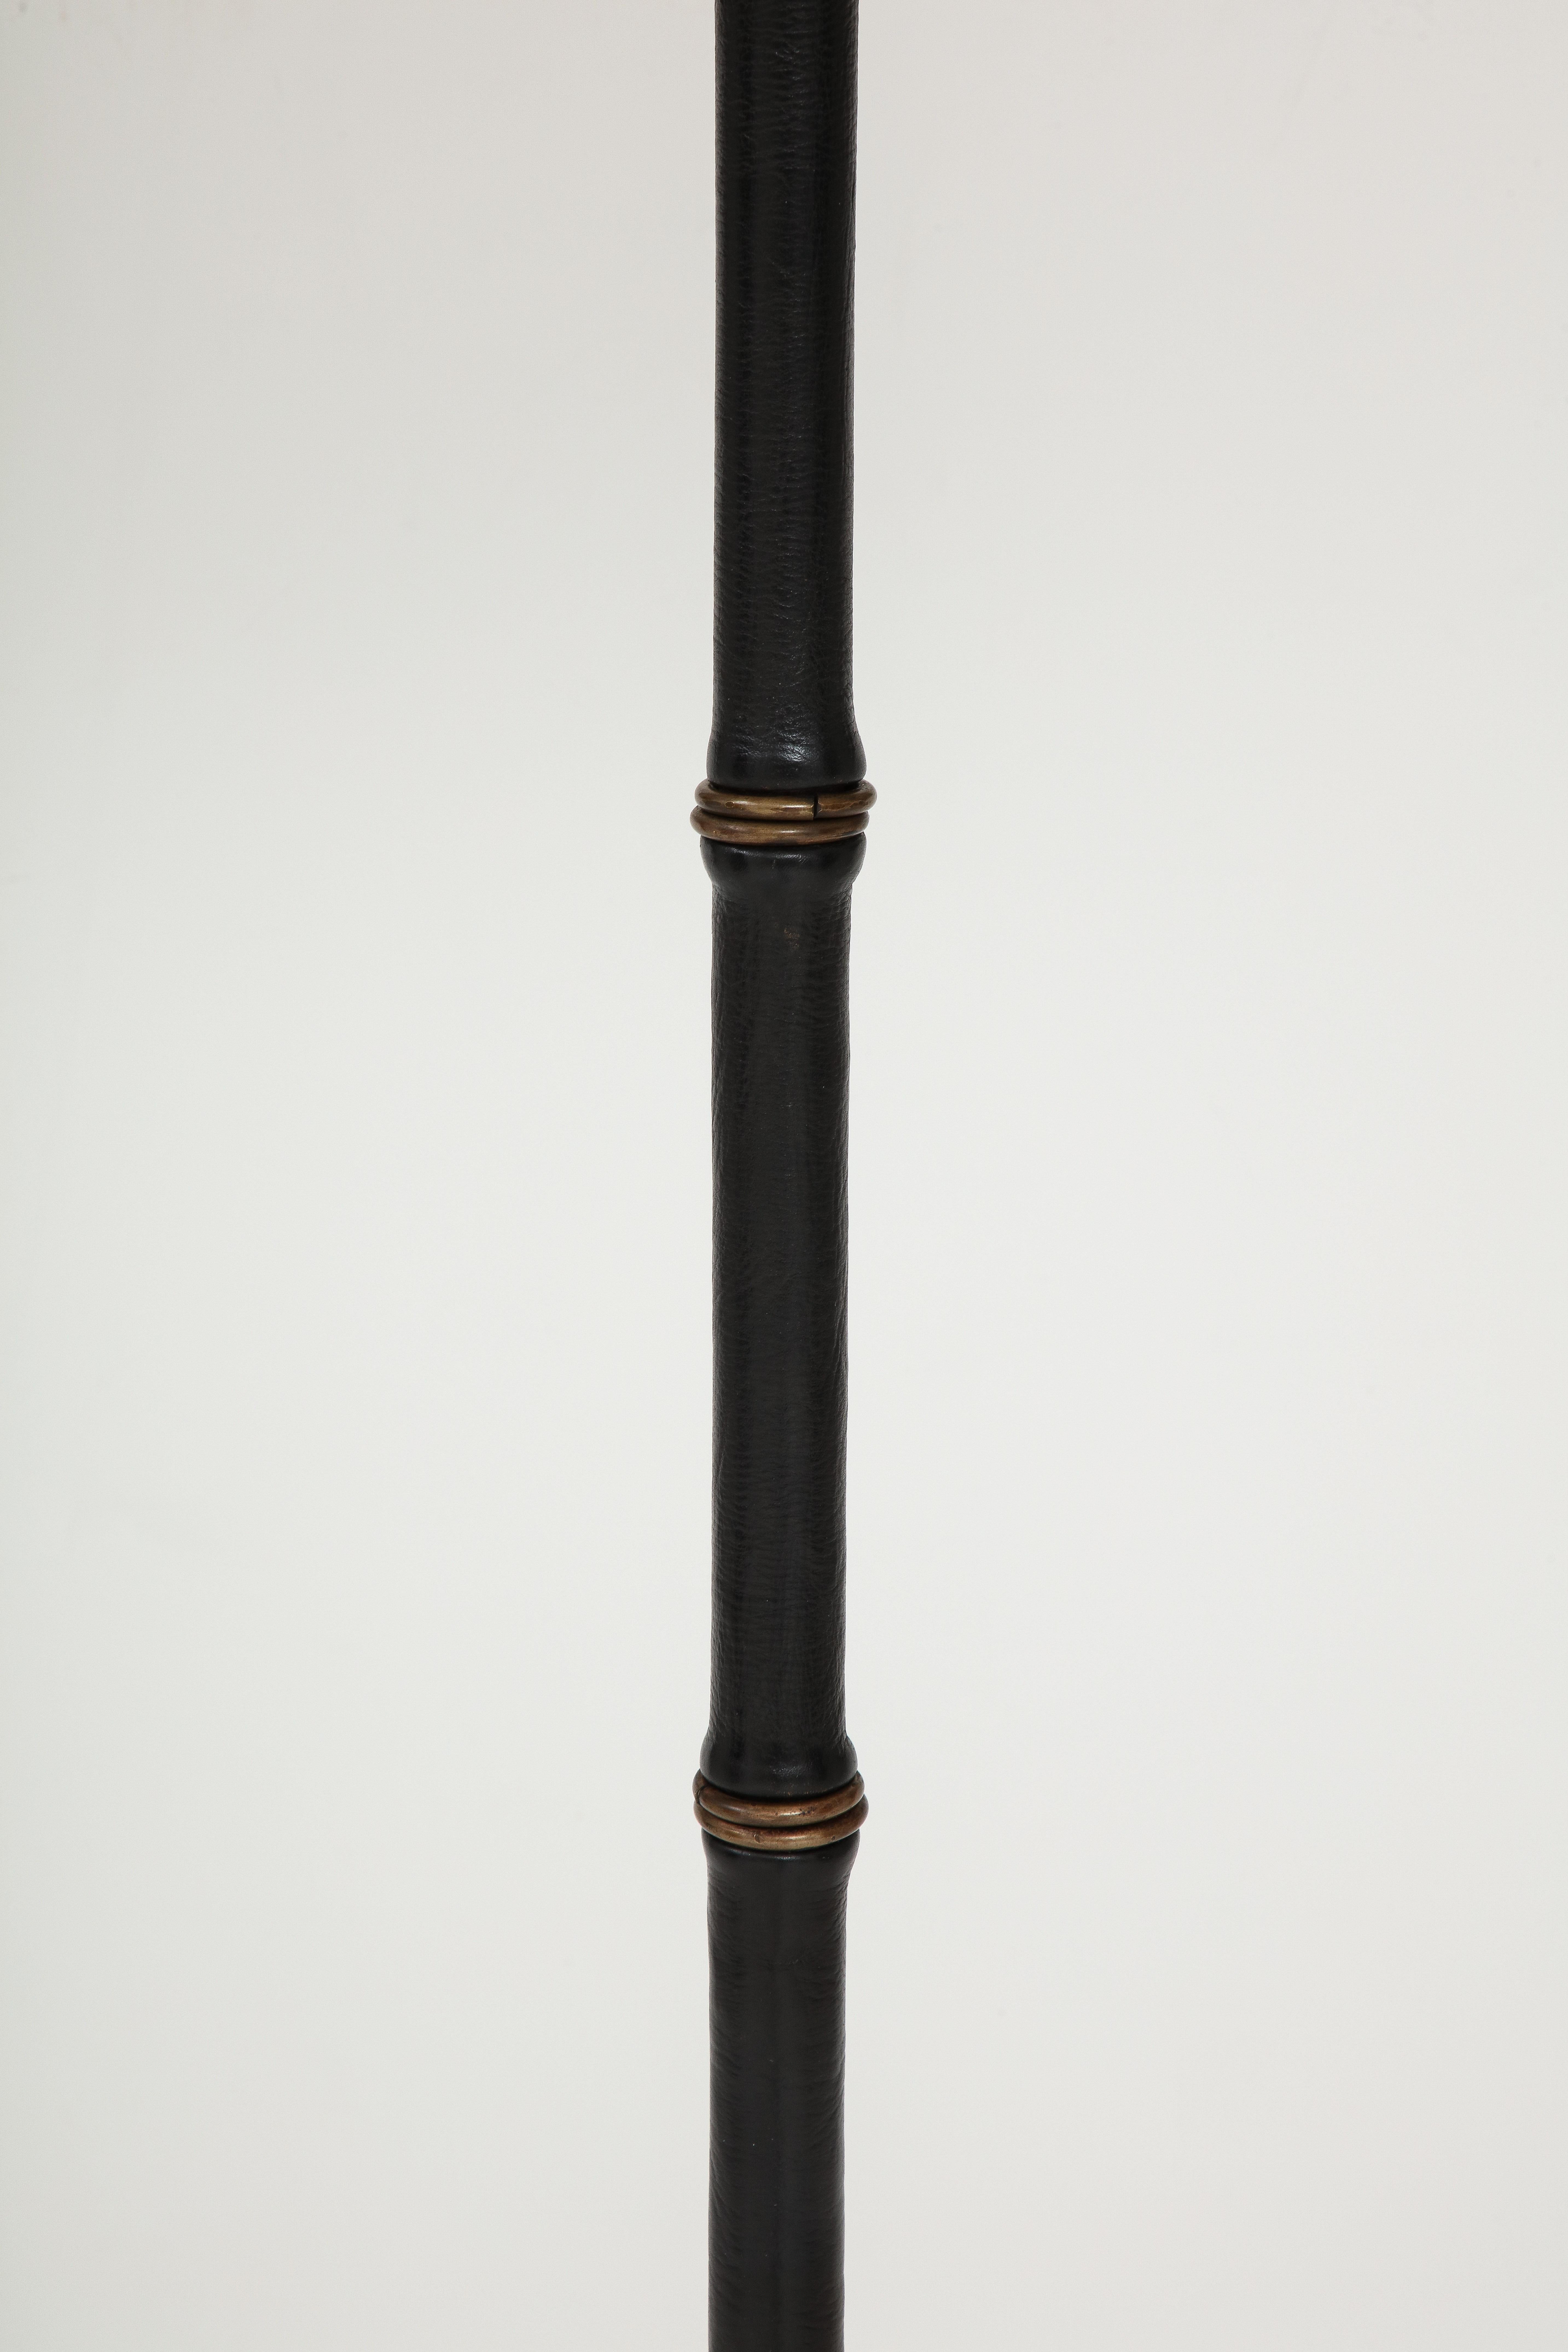 Brass Jacques Adnet Black Leather Tripod Faux Bamboo Floor Lamp, 1950s For Sale